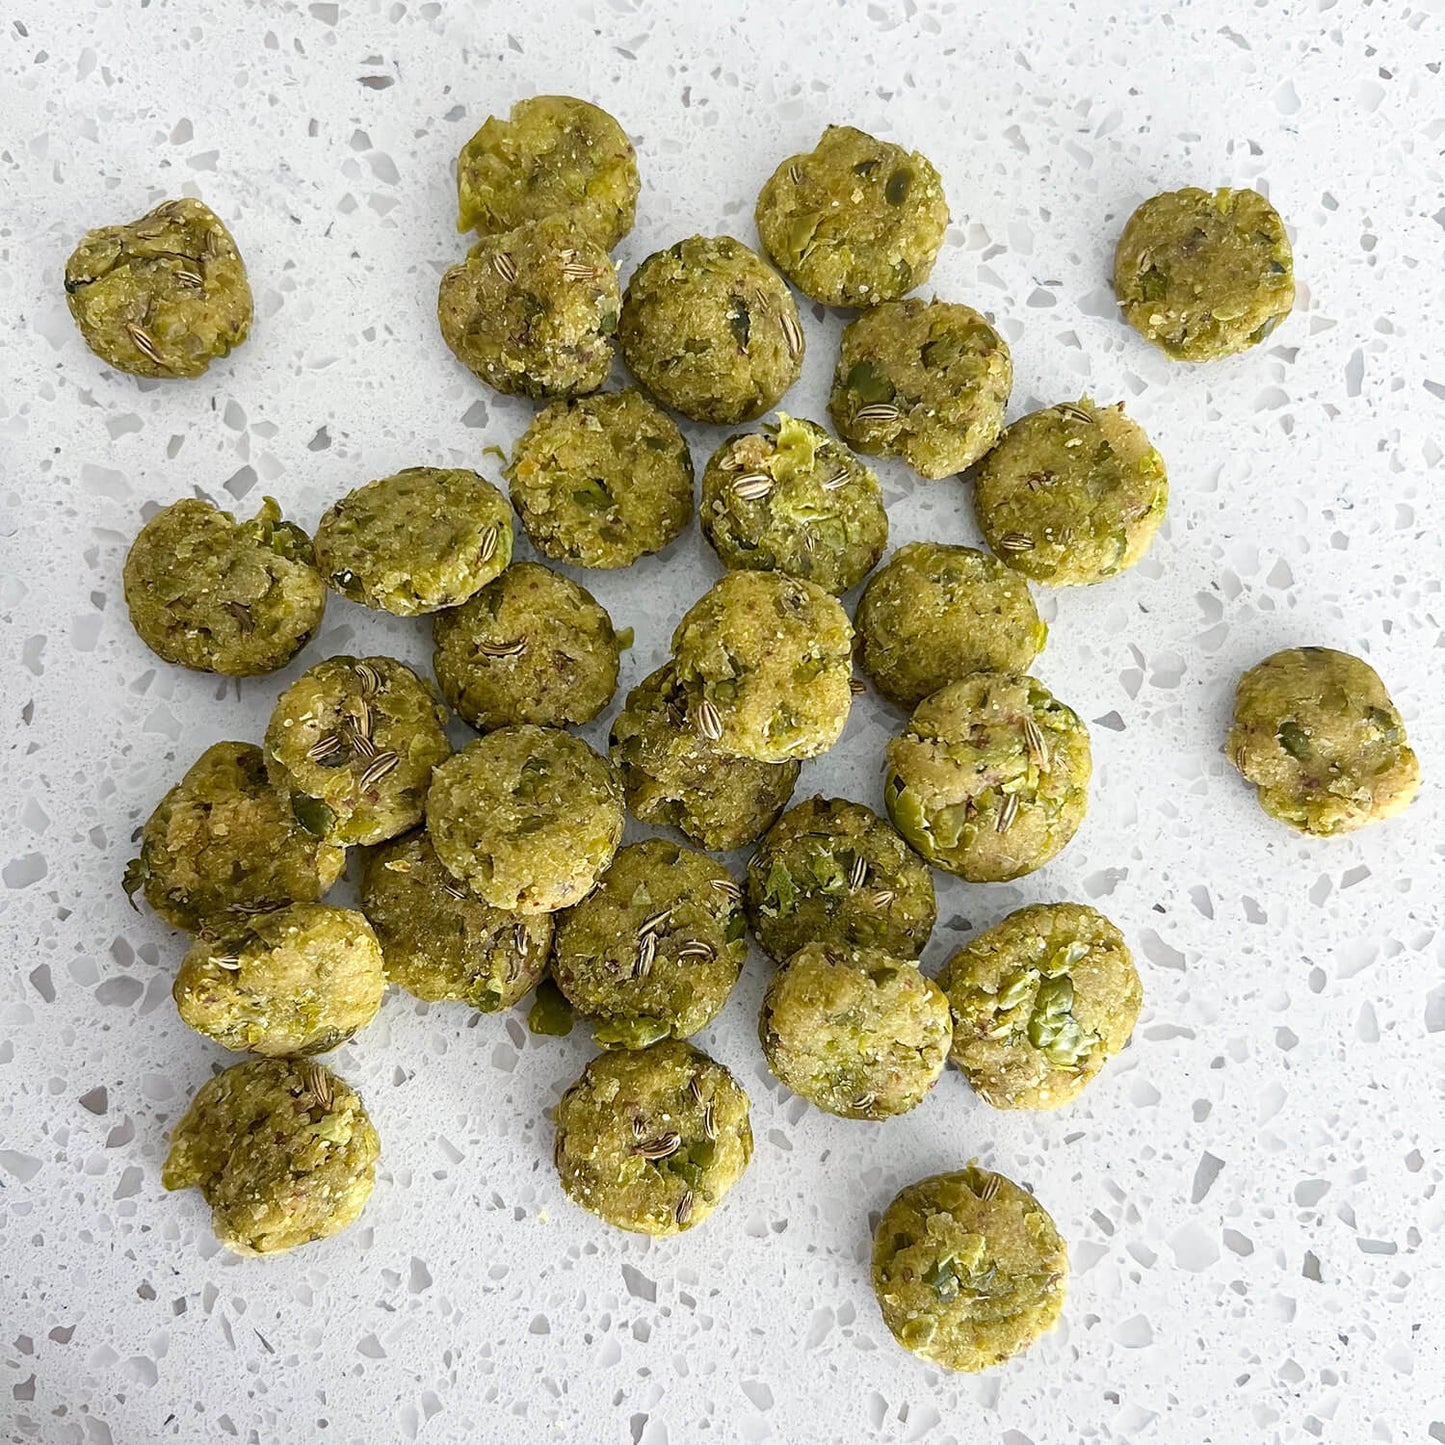 Image displaying Wagging Companions' 'Side Salad' blend dog treats outside of their packaging. These treats consist of a blend containing green peas, almond flour, parsley, fennel seeds, and flaxseed. The diverse mix reflects the brand's commitment to providing a nutritious, plant-based option tailored for dogs' health and well-being.